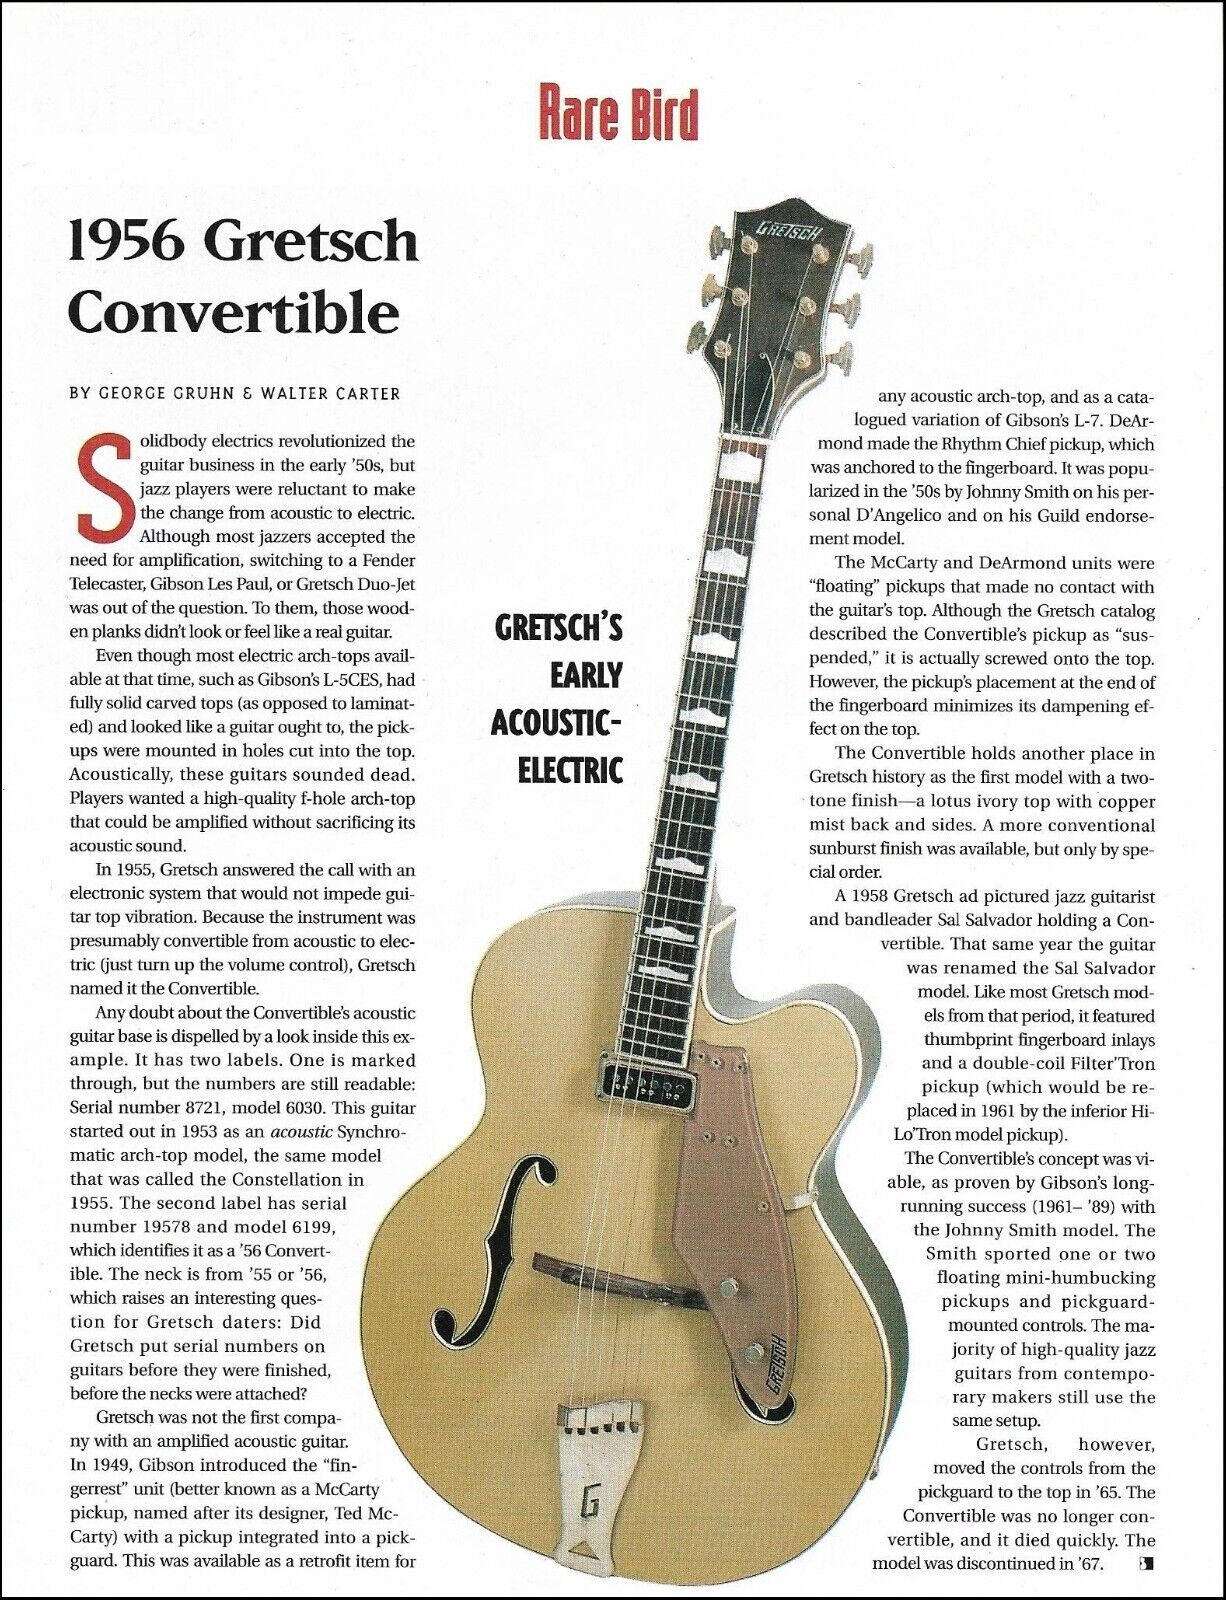 1956 Gretsch Convertible acoustic/electric guitar 1993 history article